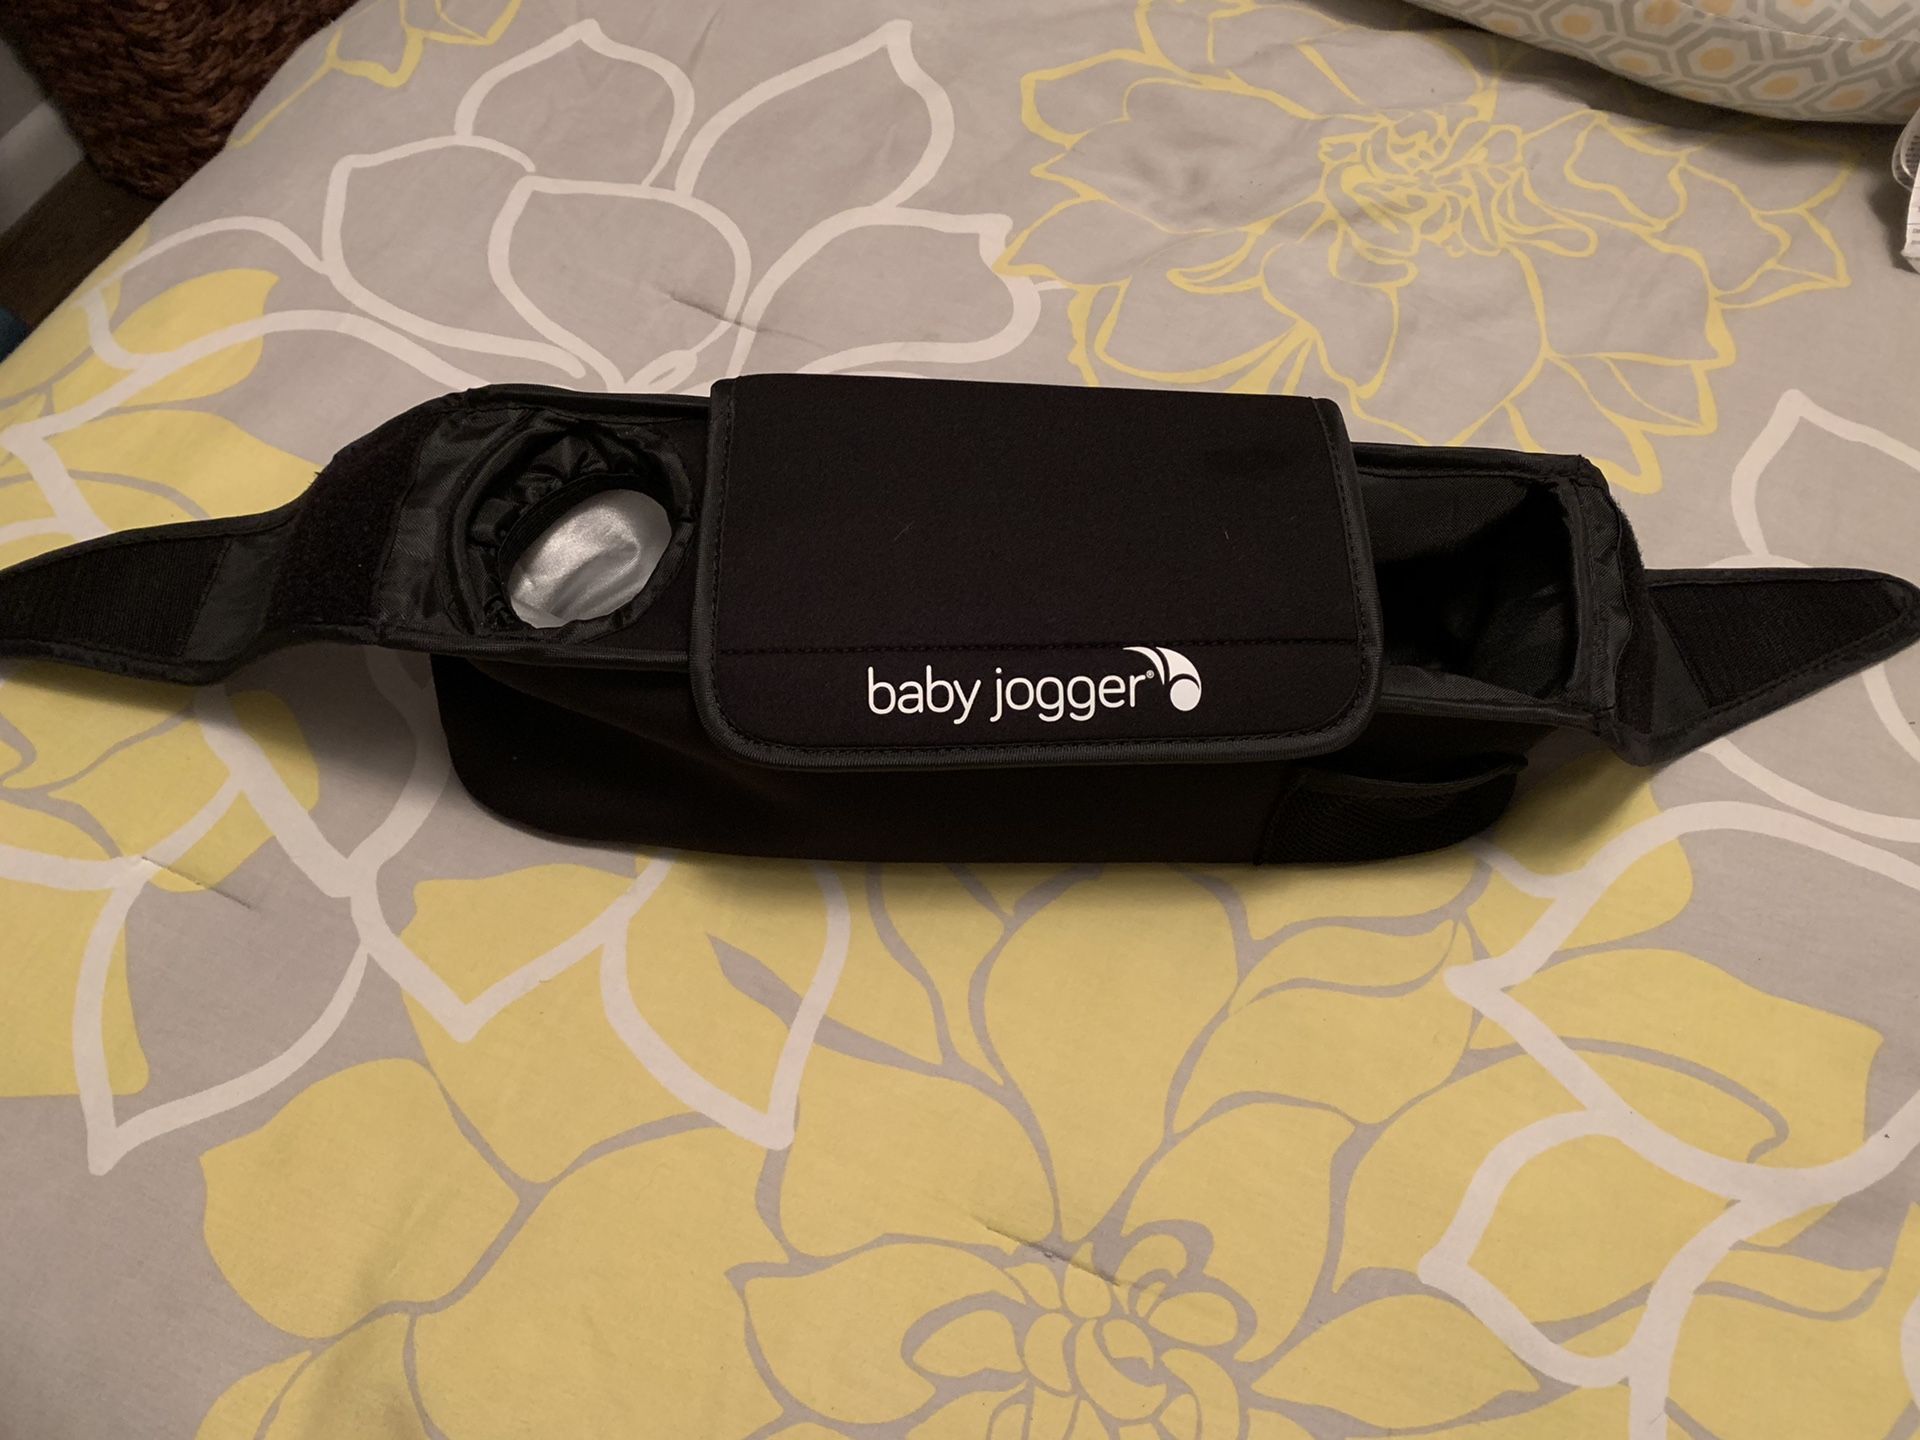 Baby jogger stroller counsel